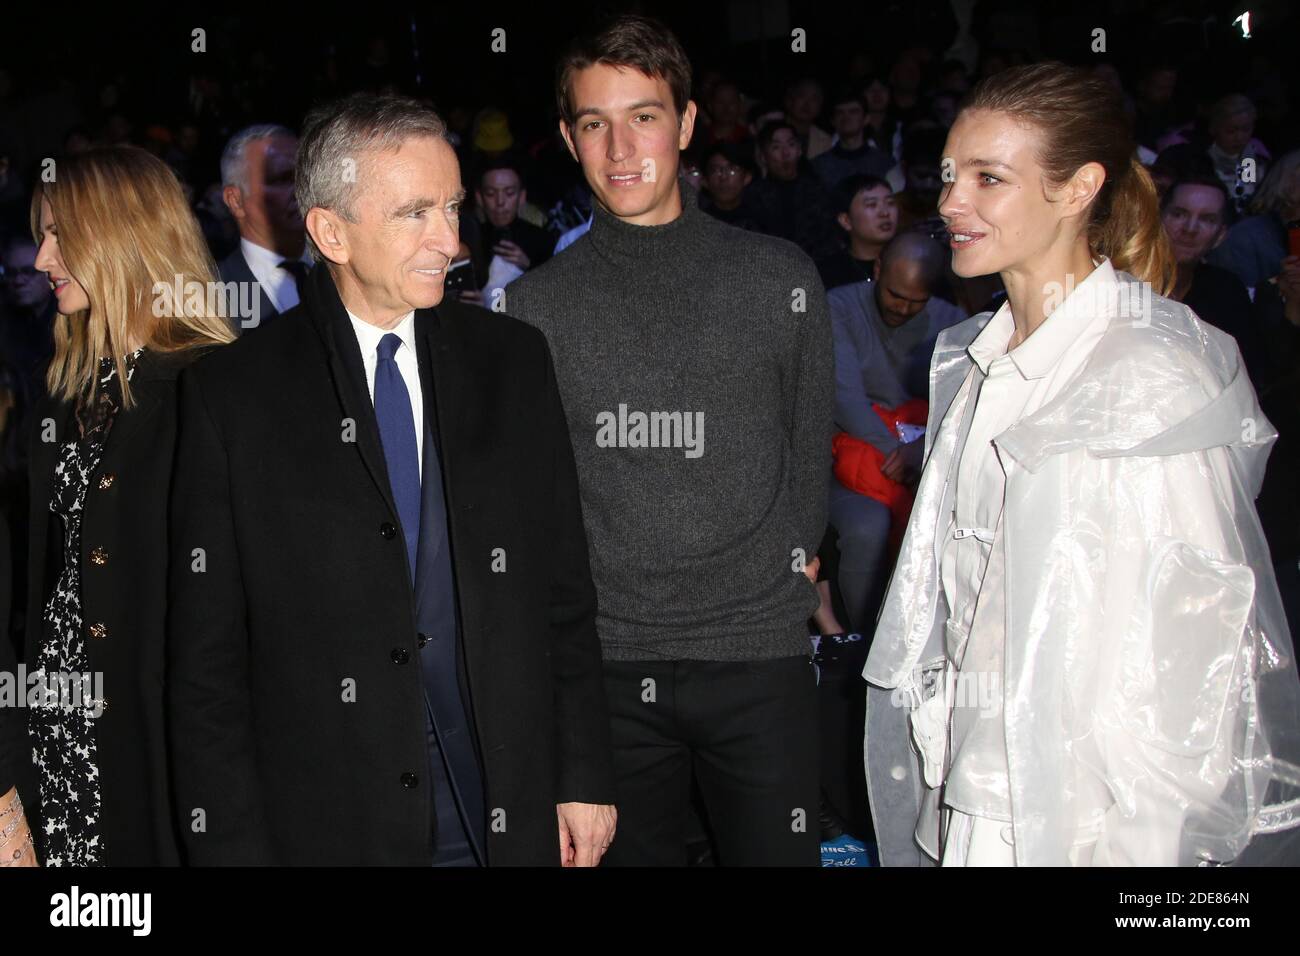 Bernard Arnault, Alexandre Arnault and Natalia Vodianova attending the Louis  Vuitton Menswear Fall/Winter 2019-2020 show as part of Paris Fashion Week  in Paris, France on January 17, 2019. Photo by Jerome Domine/ABACAPRESS.COM